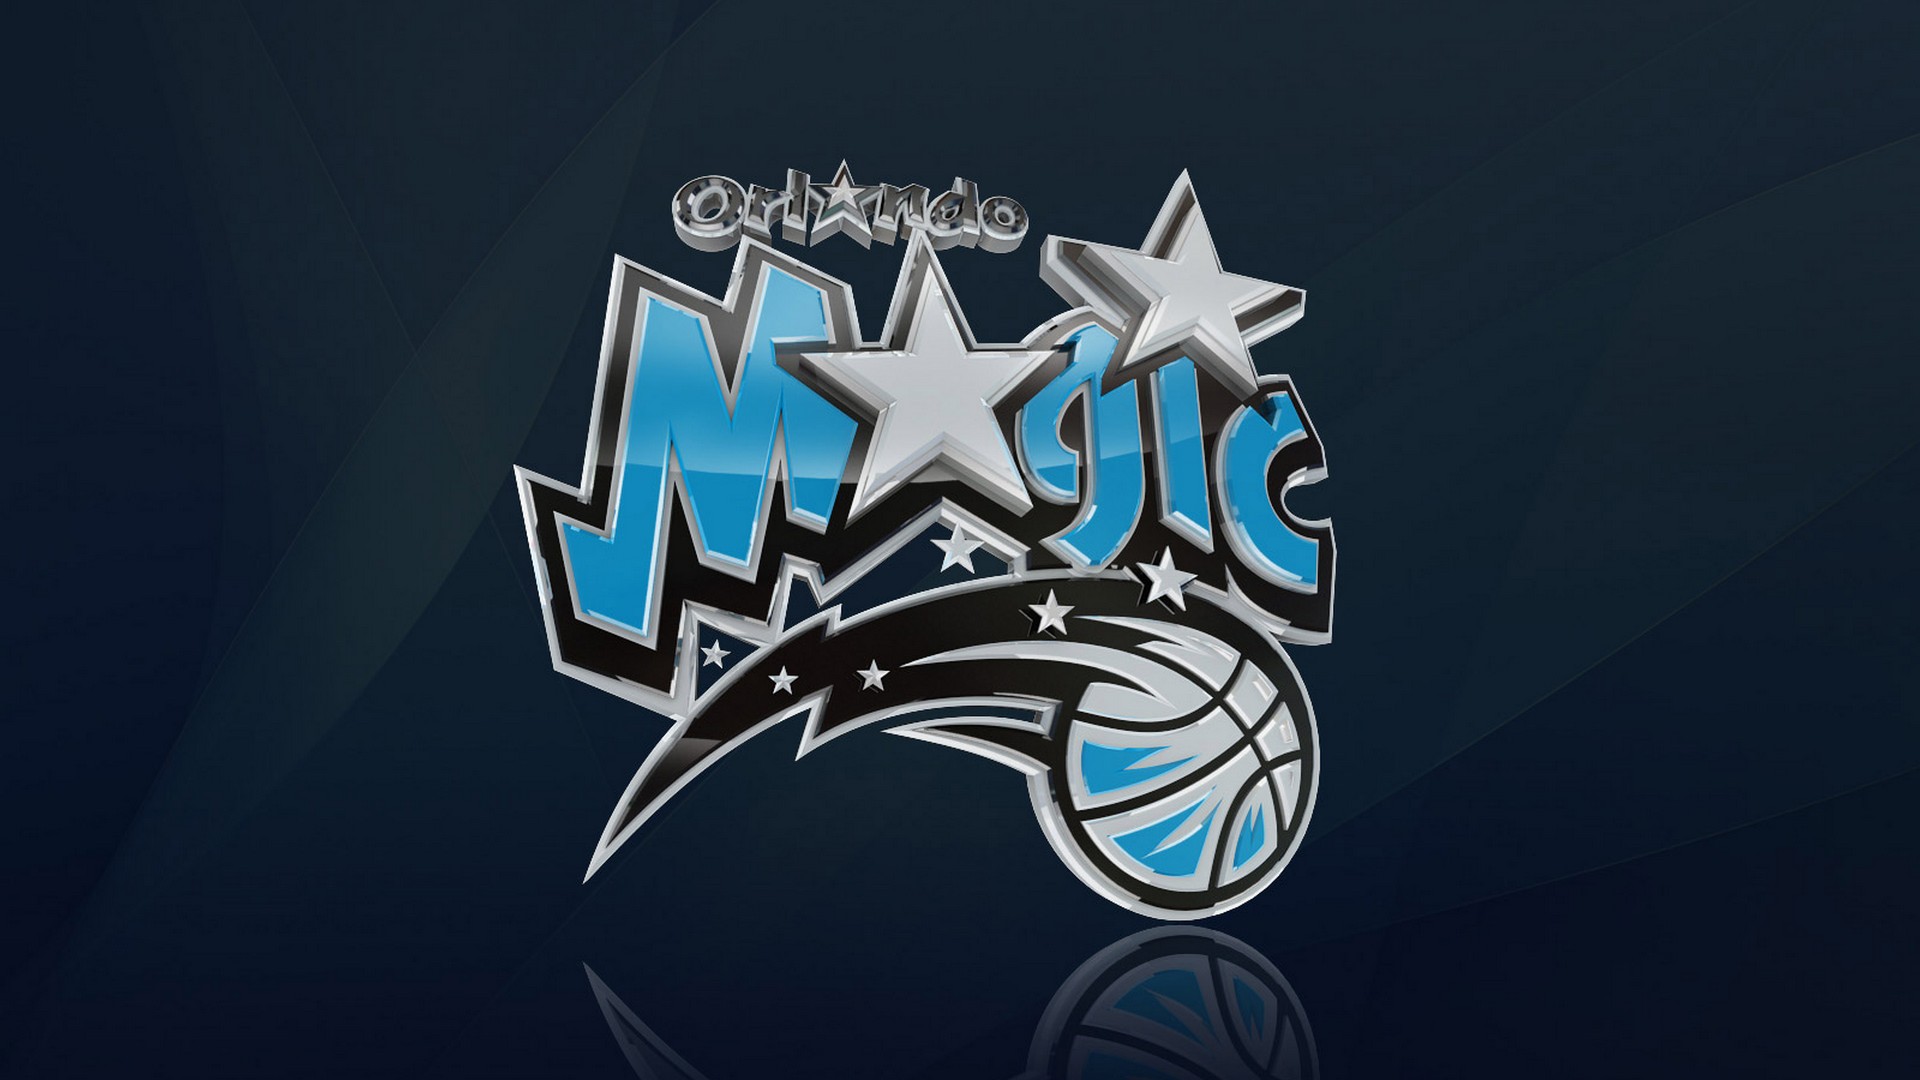 Wallpapers Orlando Magic NBA with high-resolution 1920x1080 pixel. You can use this wallpaper for your Desktop Computer Backgrounds, Windows or Mac Screensavers, iPhone Lock screen, Tablet or Android and another Mobile Phone device